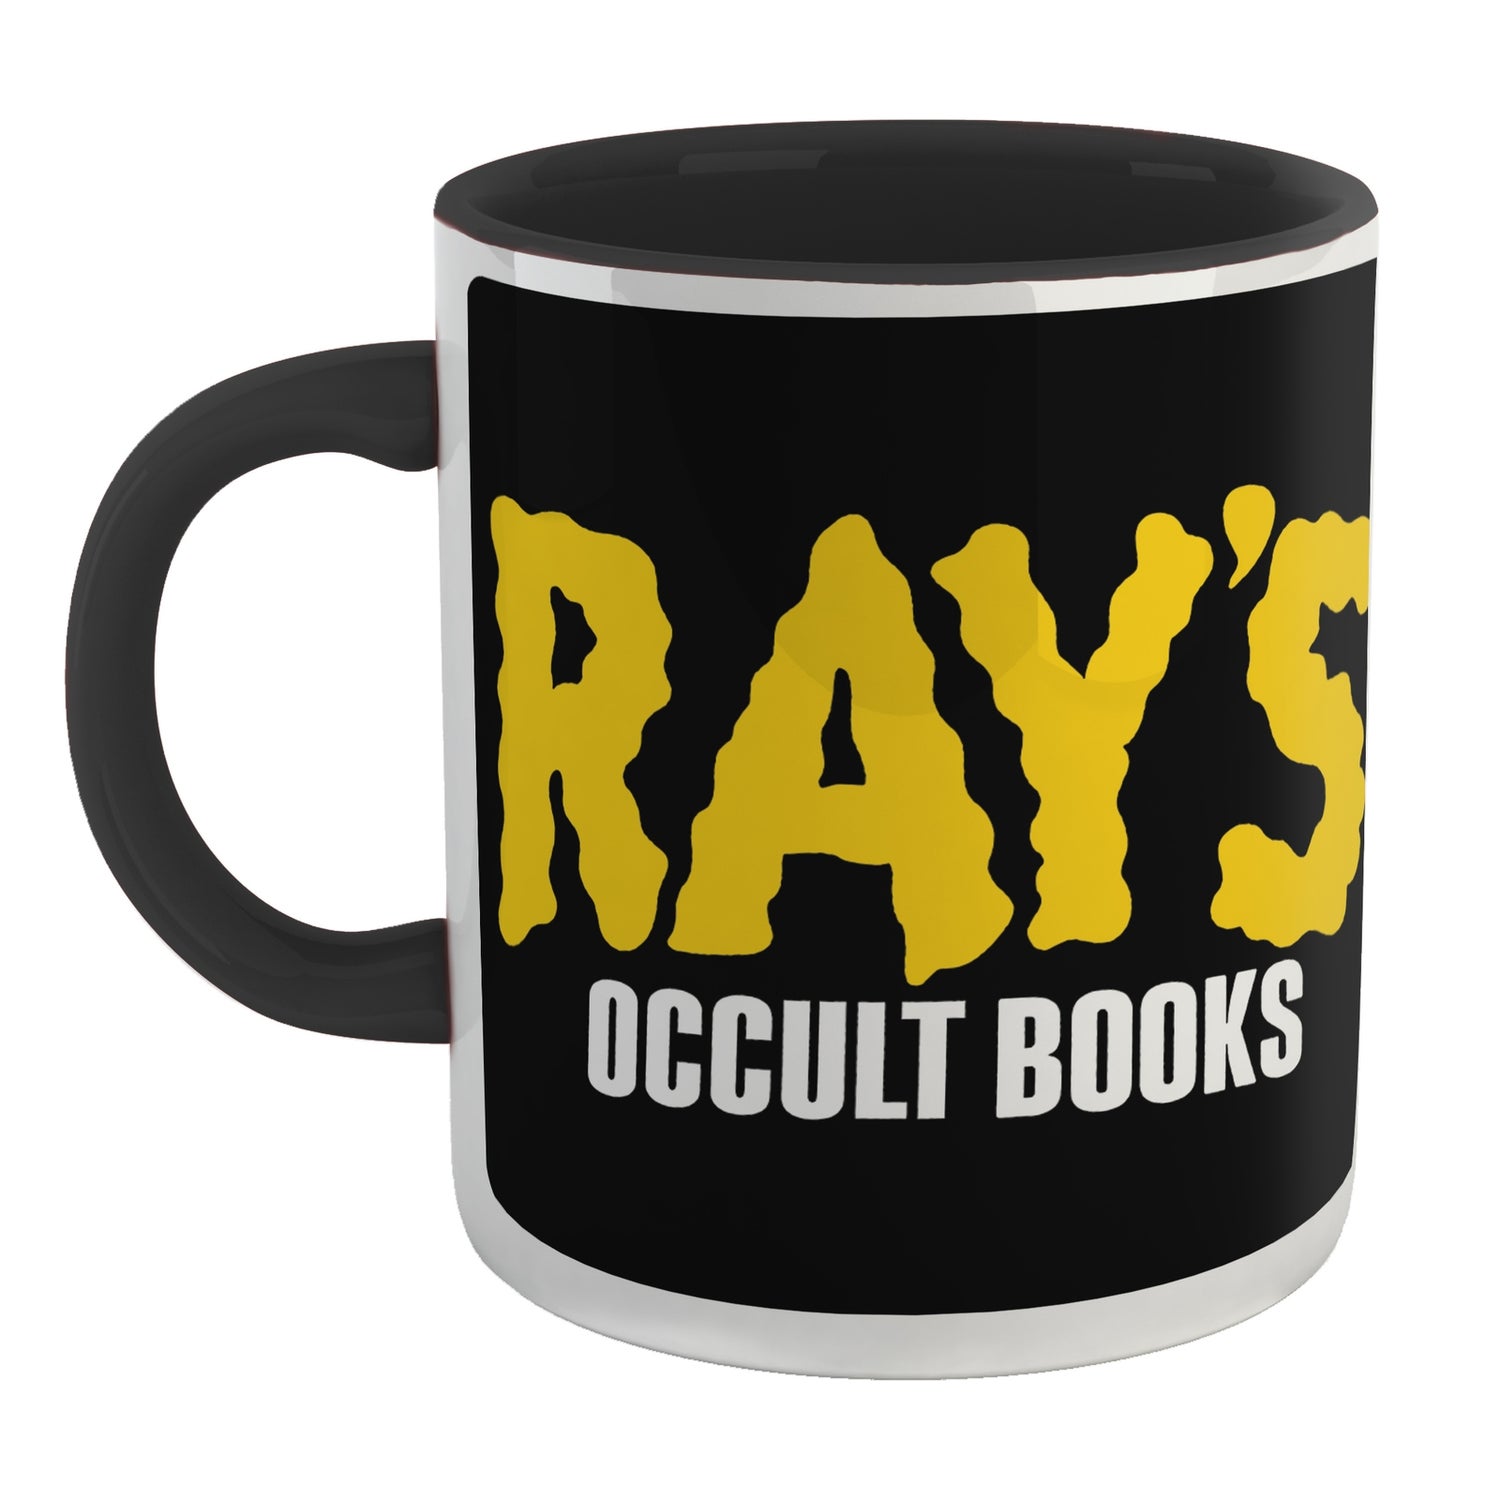 Ghostbusters Ray's Occult Books Mug - Black